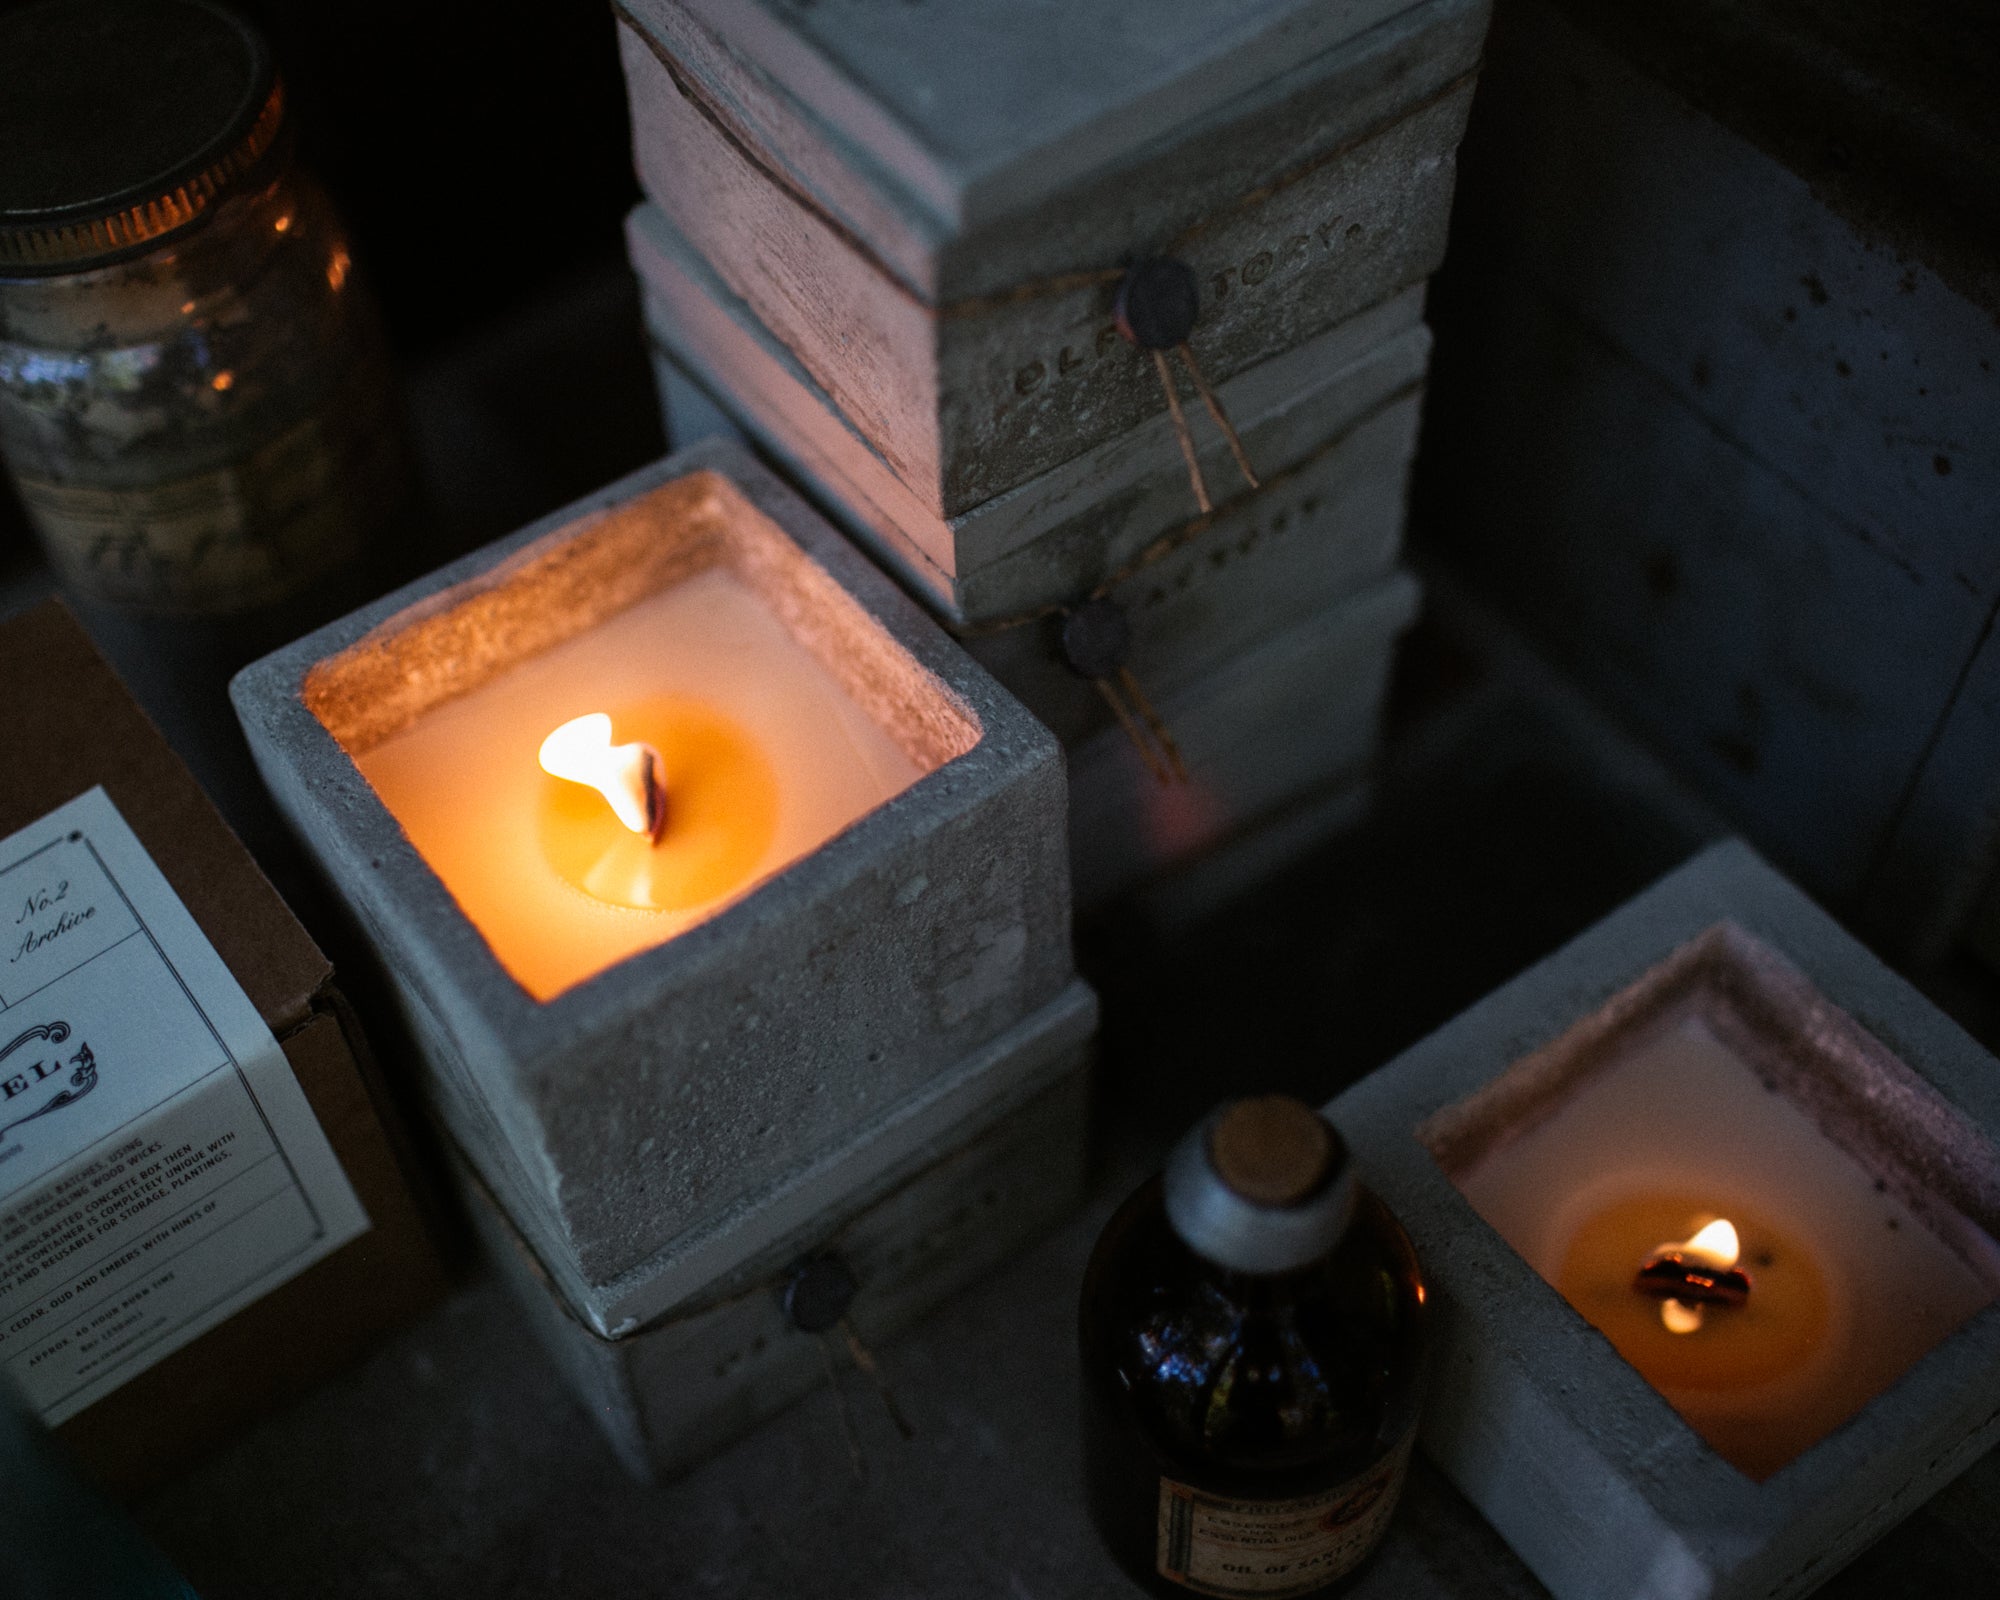 No. 3: Nostalgia Parcel Olfactory Scented Candle in Concrete Vessel